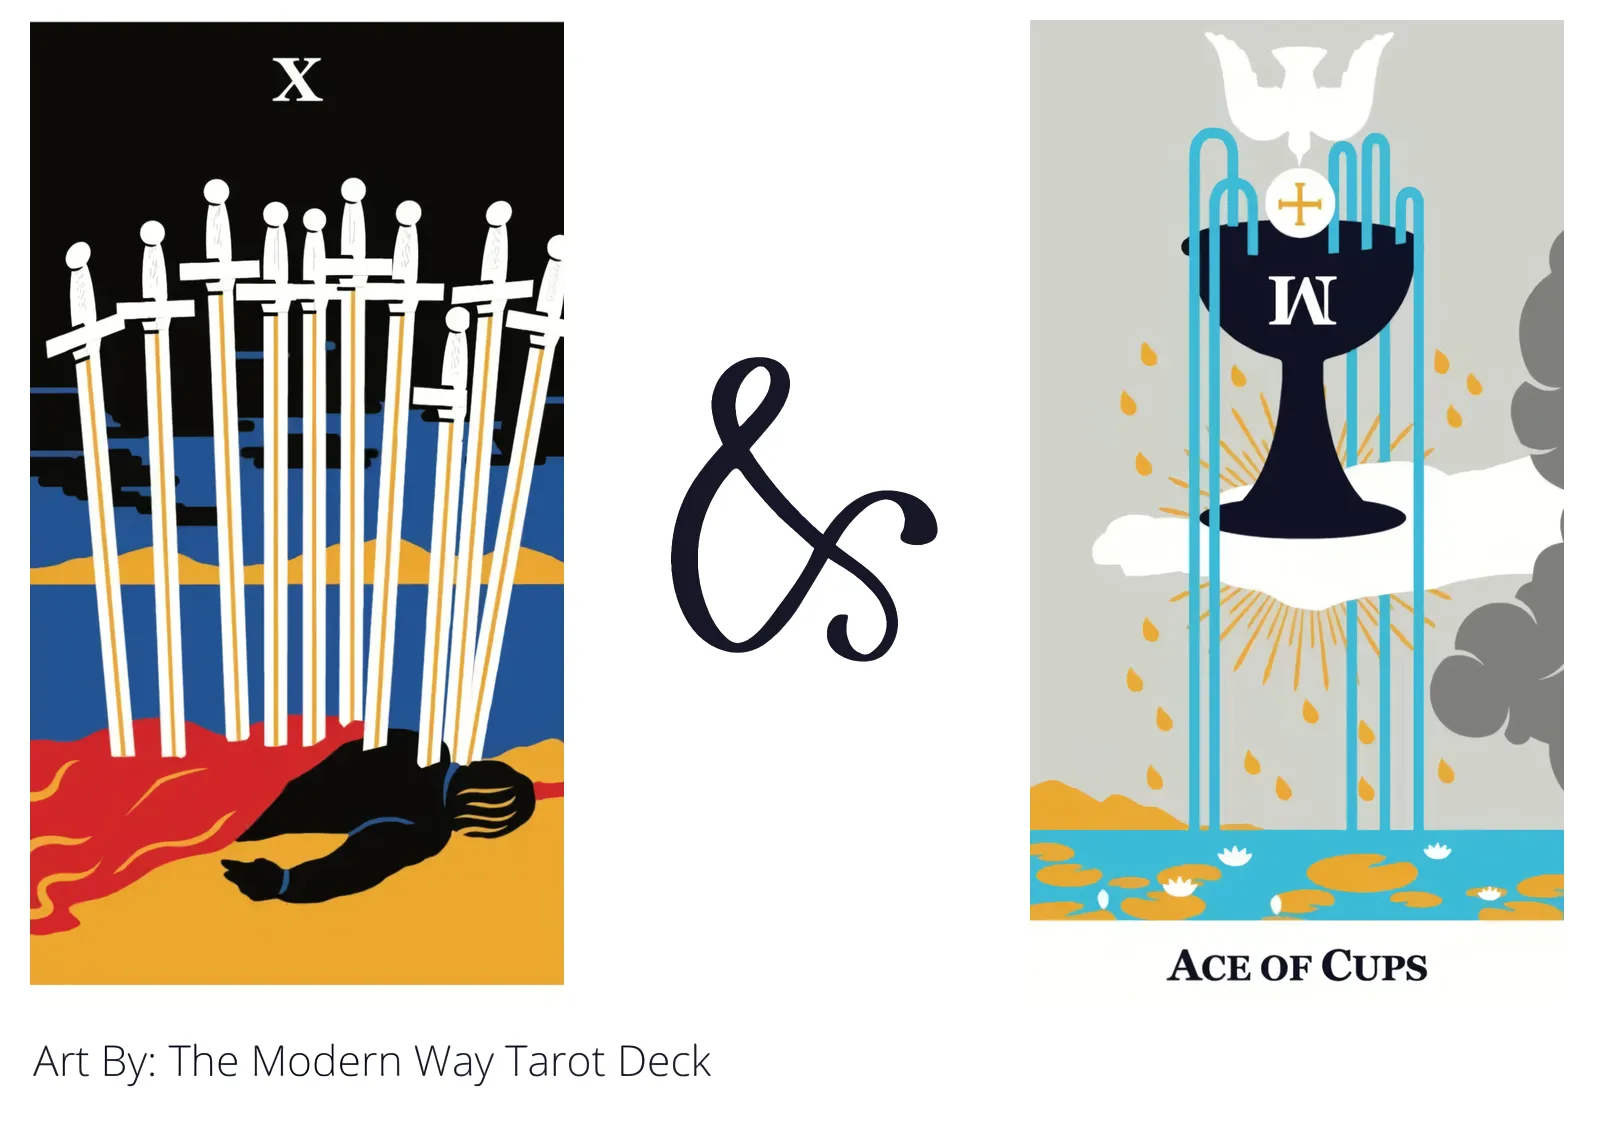 ten of swords and ace of cups tarot cards together